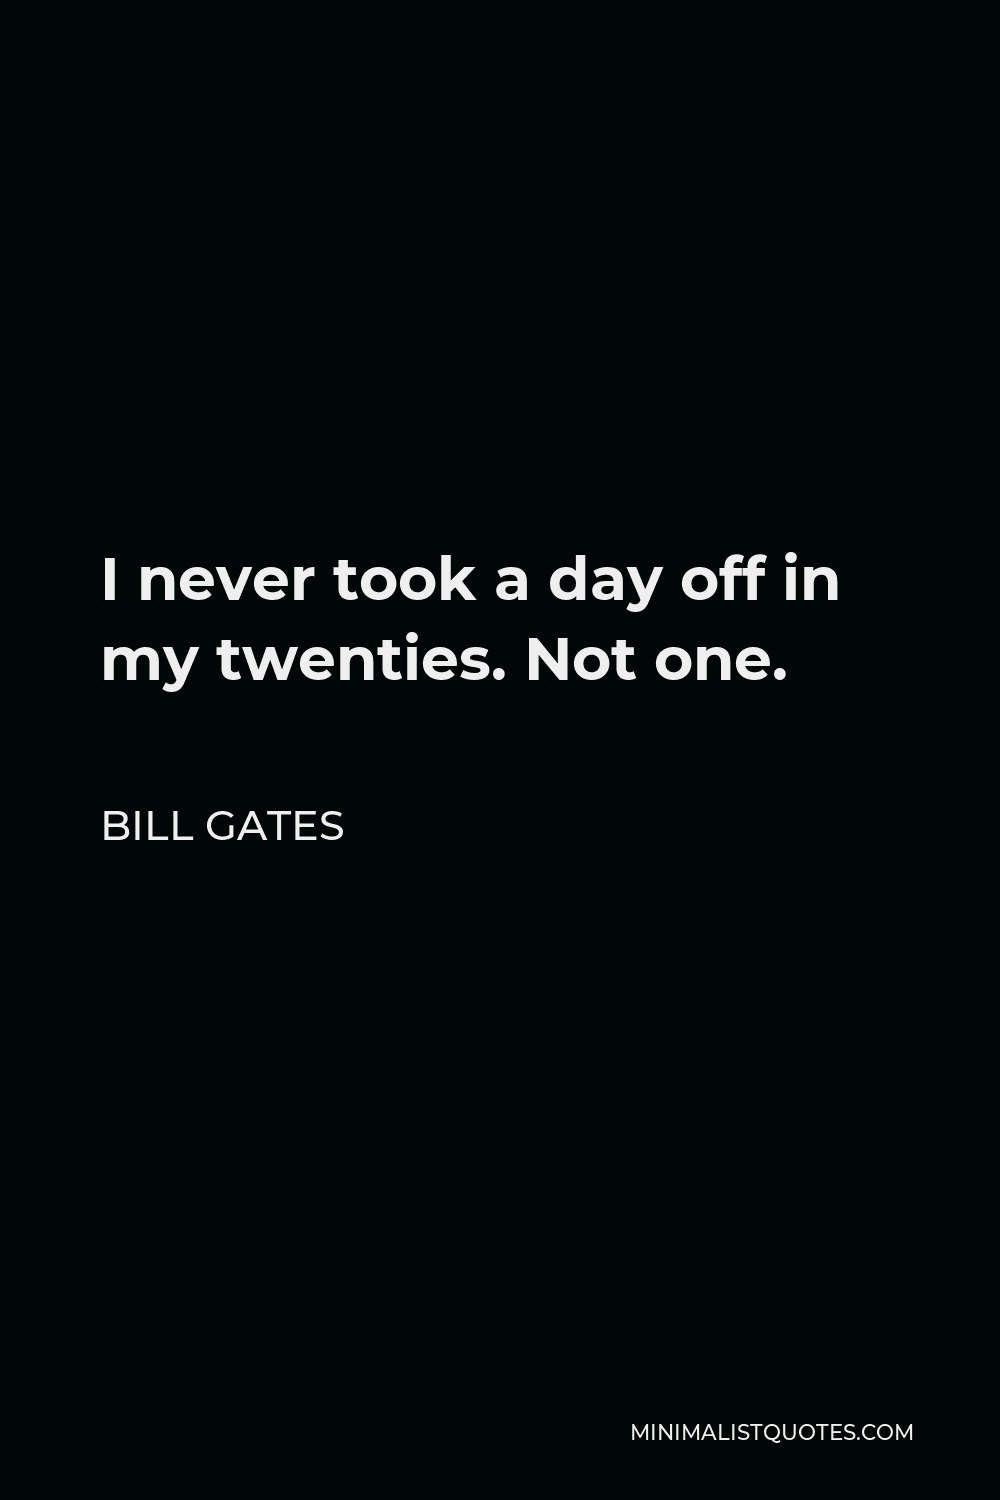 Bill Gates Quote - I never took a day off in my twenties. Not one.